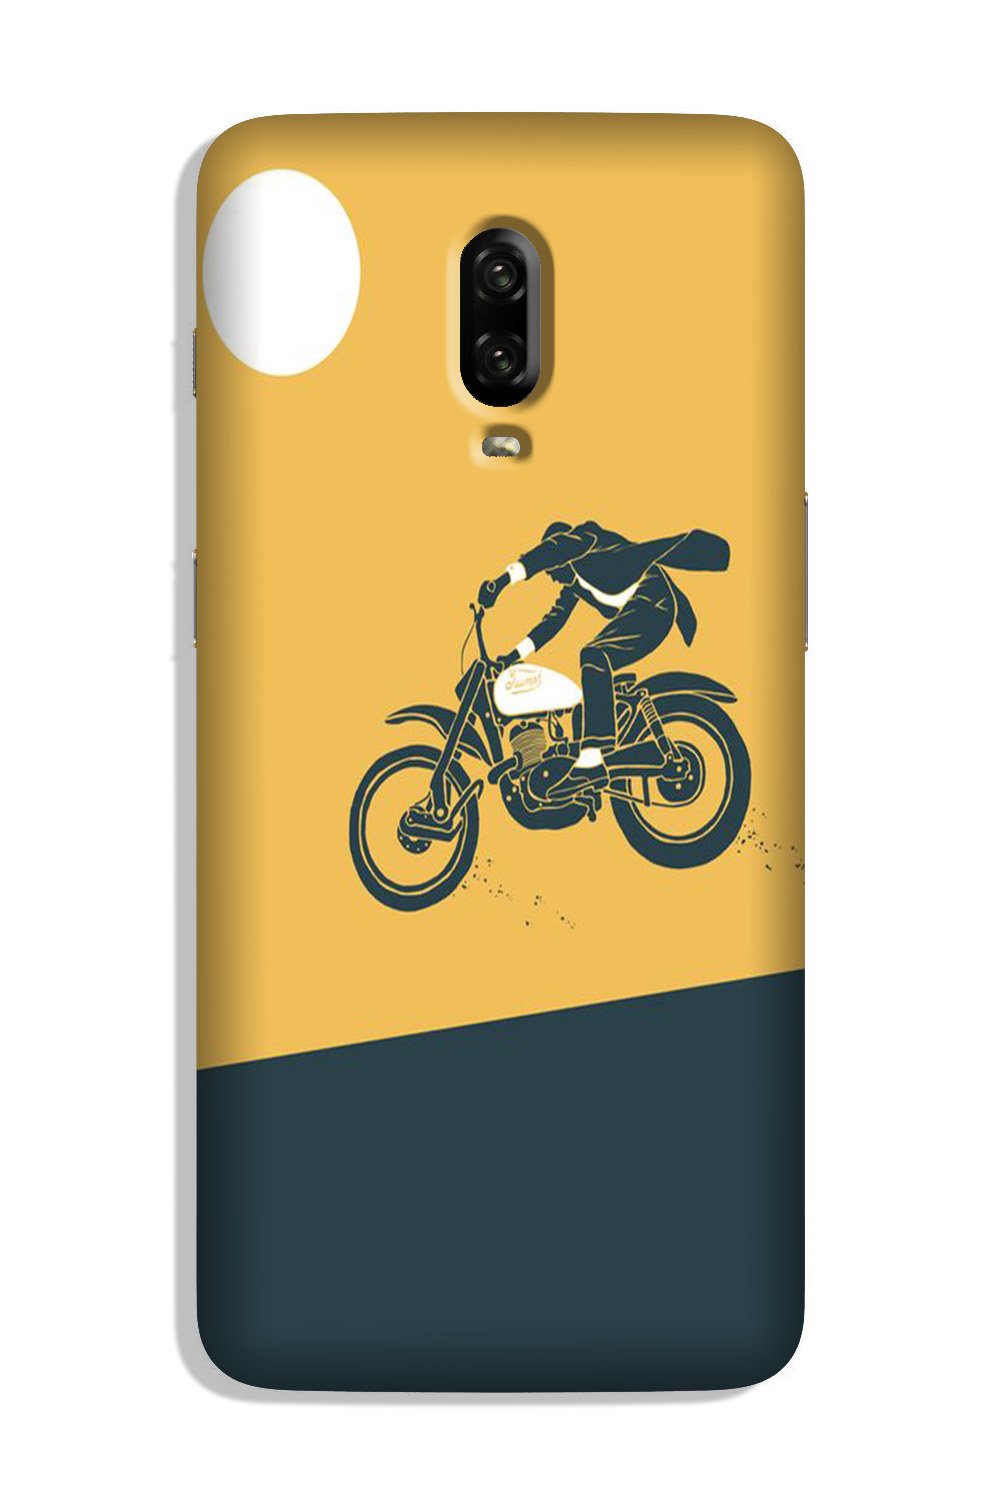 Bike Lovers Case for OnePlus 7 (Design No. 256)